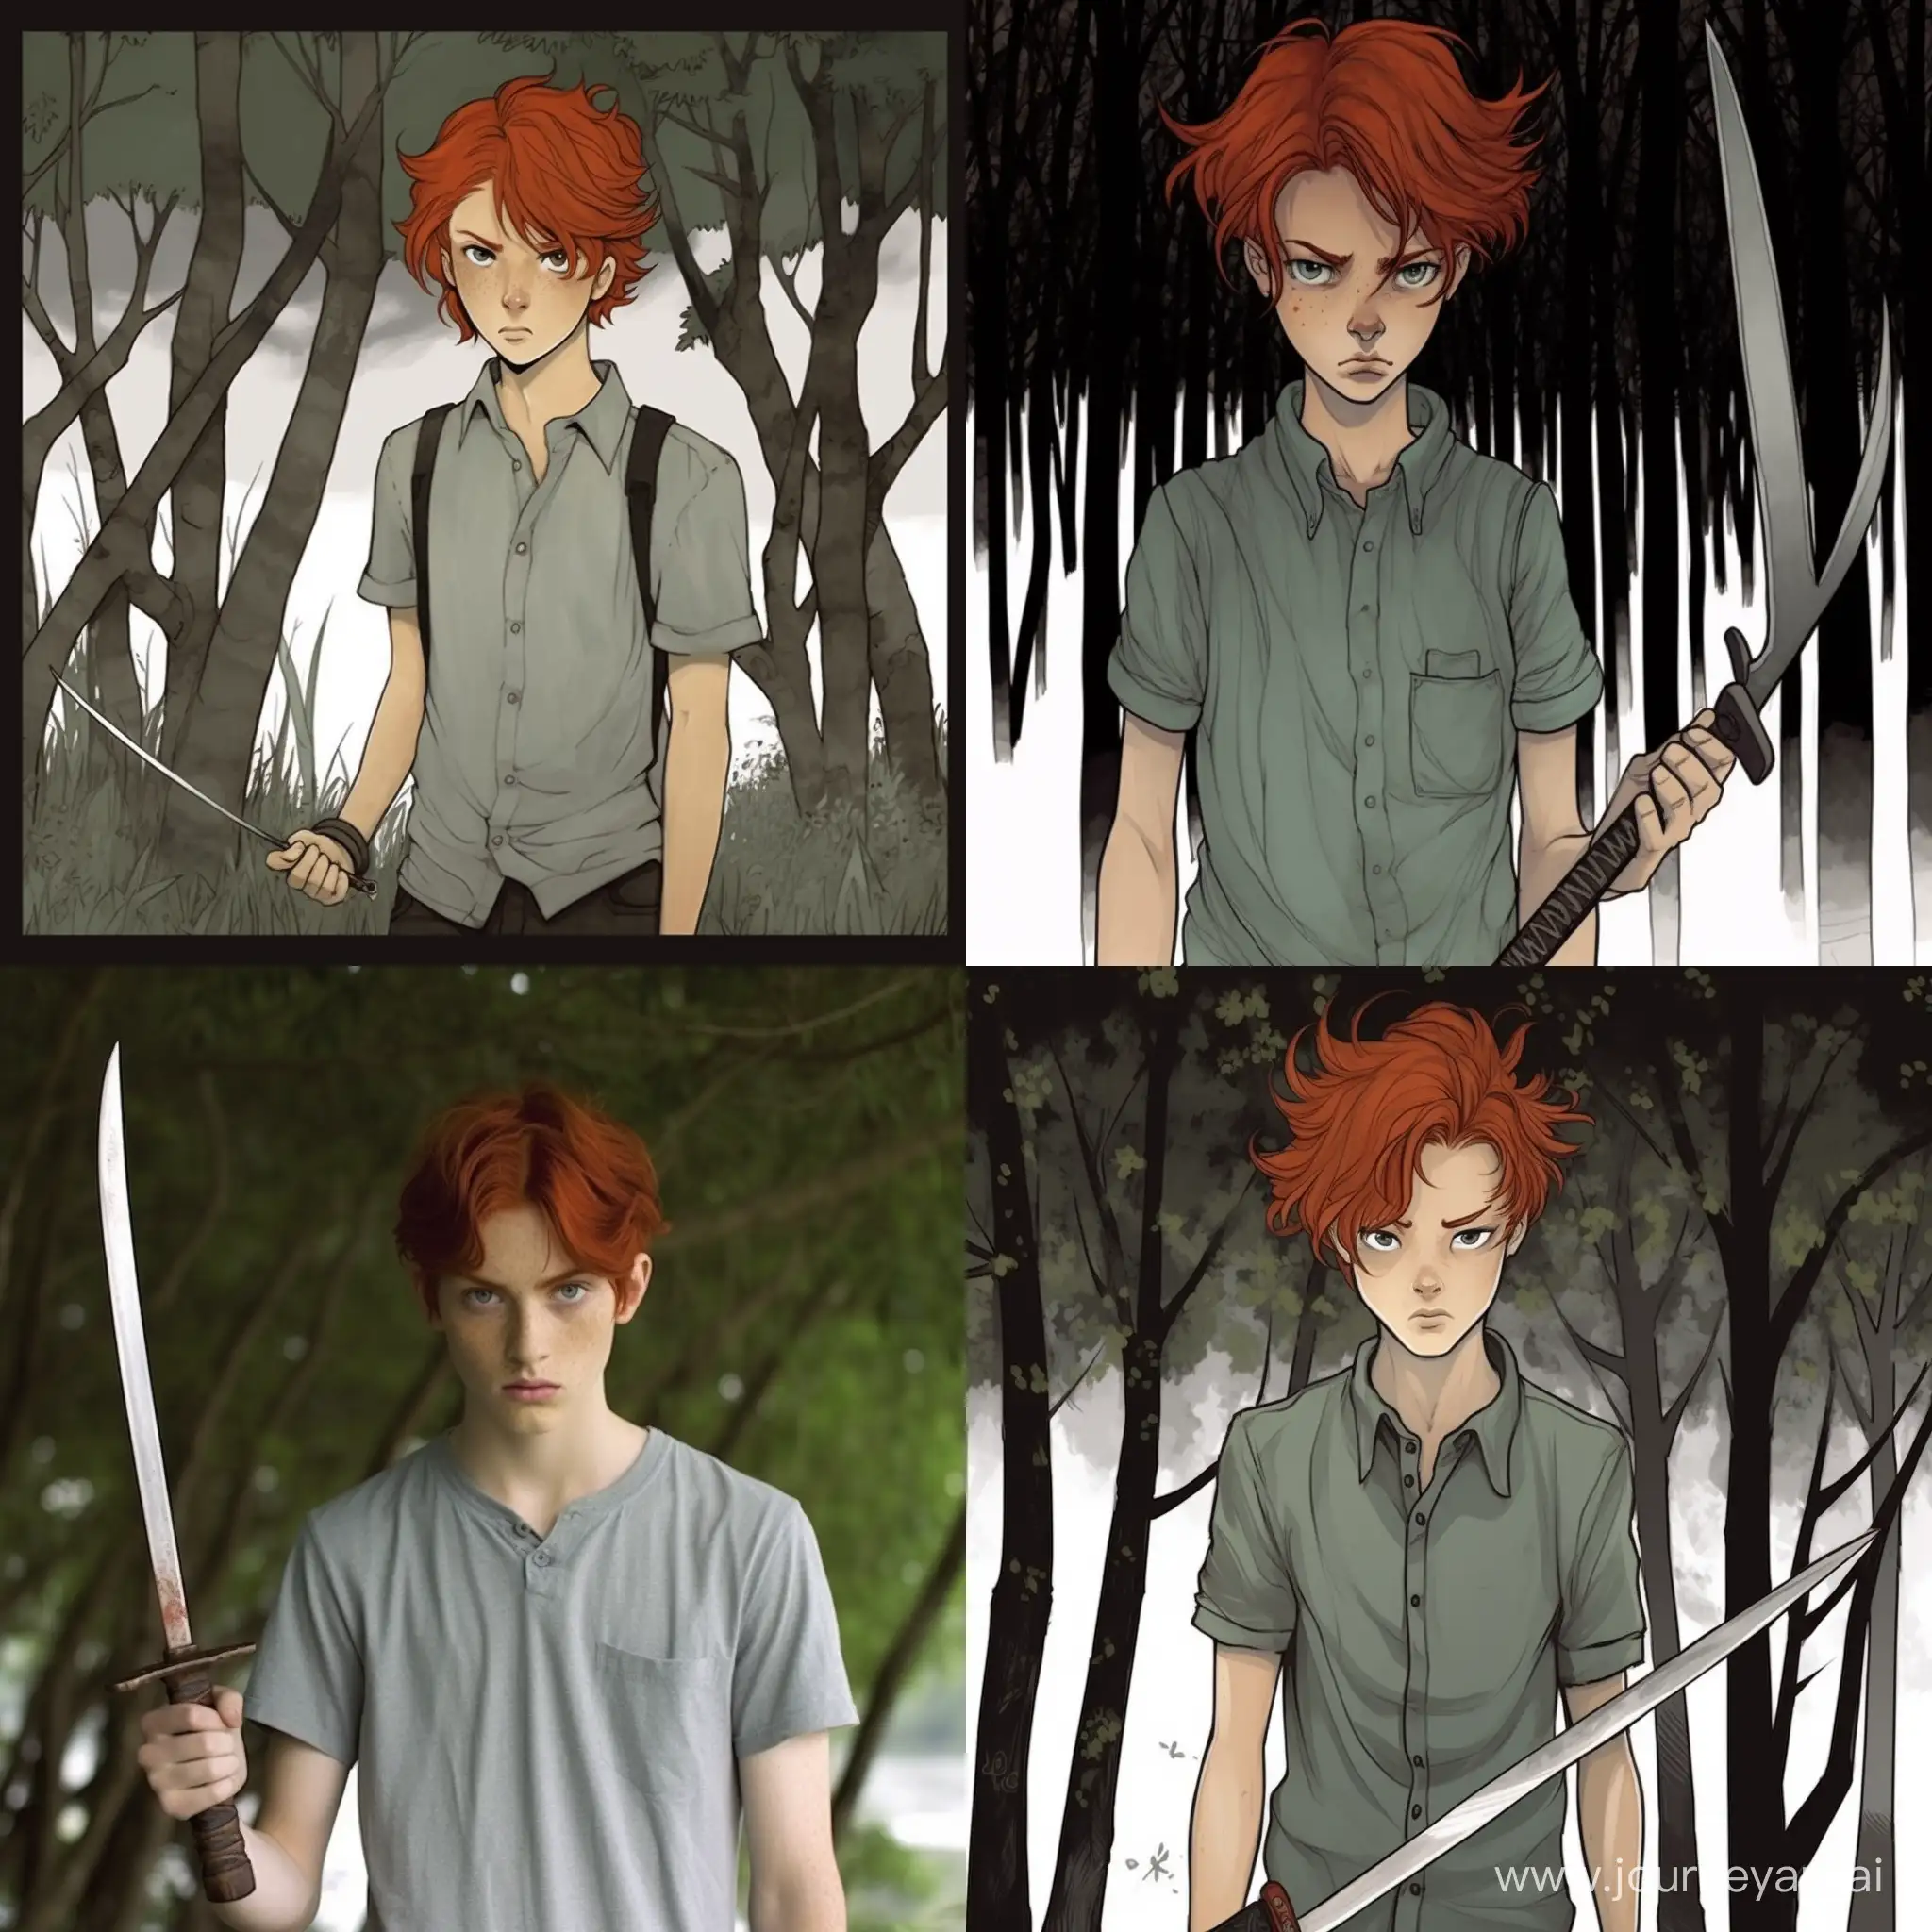 Boy. A teenager, 16 years old. Wiry, tall, fit. With curly red hair. Green eyes. Freckled face. Without a T-shirt. He's wearing battered shorts and a knife dangling from his belt. Barefoot. There is a sharpened stick in his right hand.